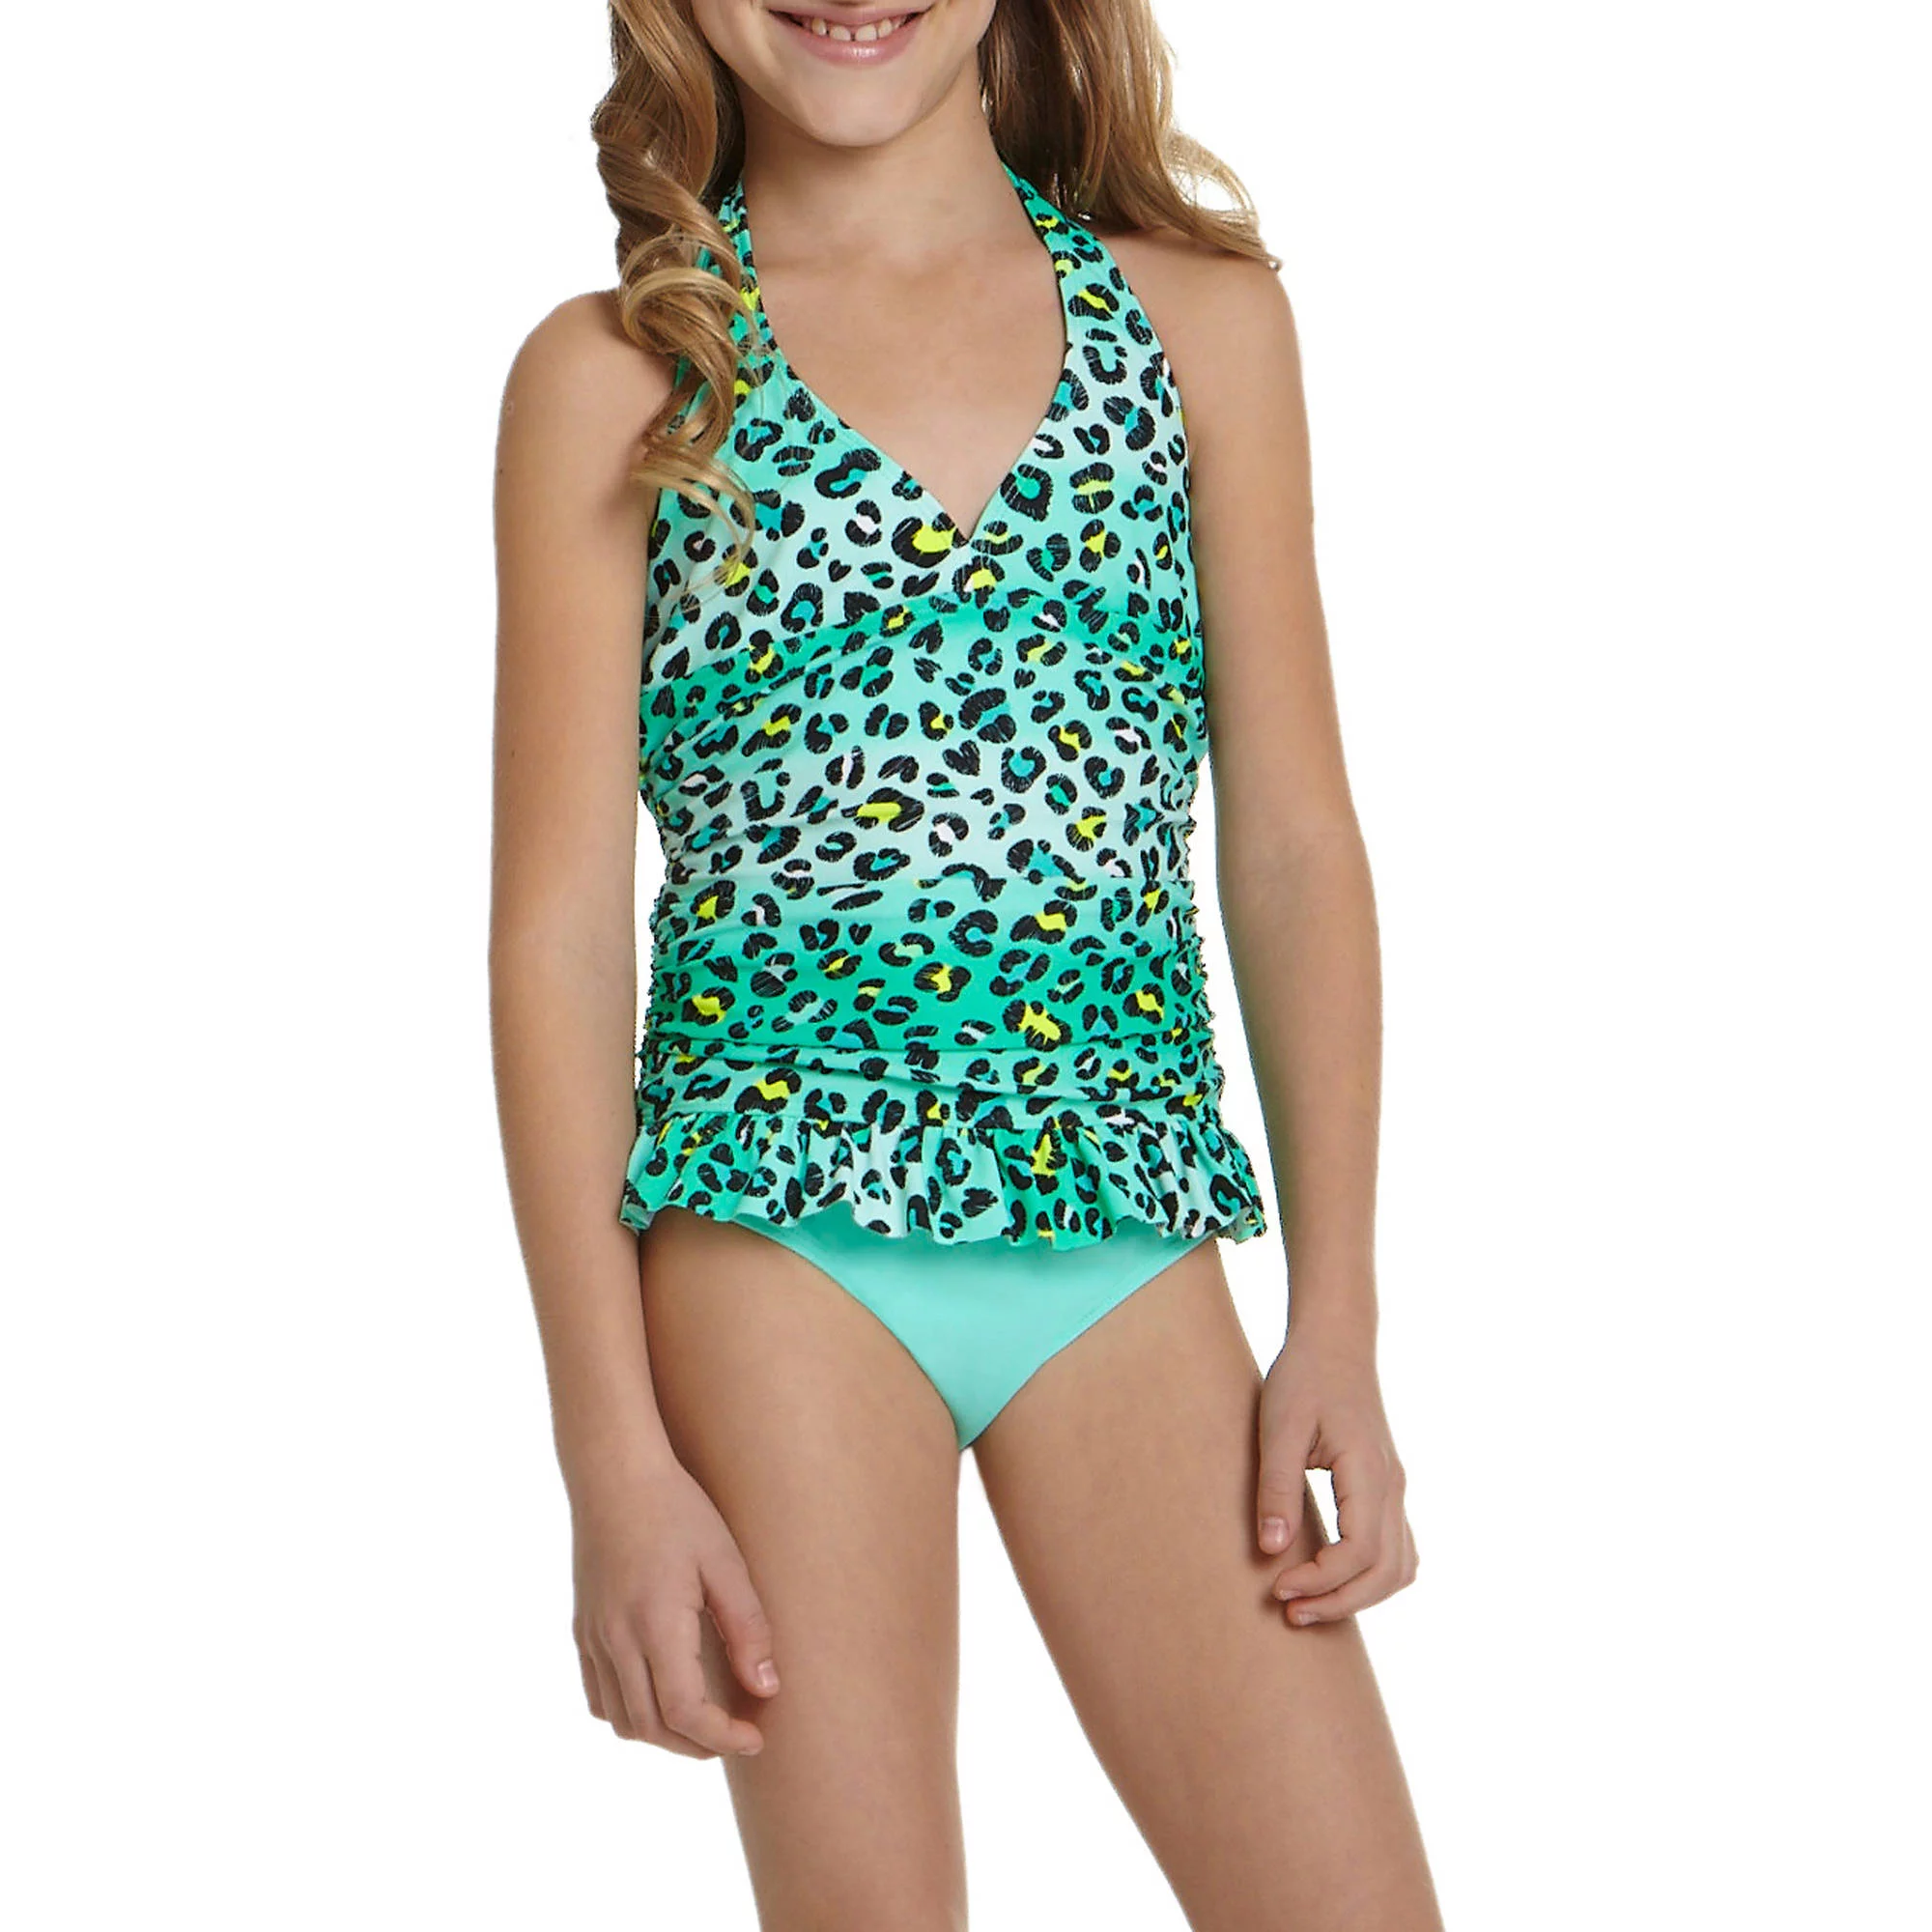 14 year old girl swimsuits